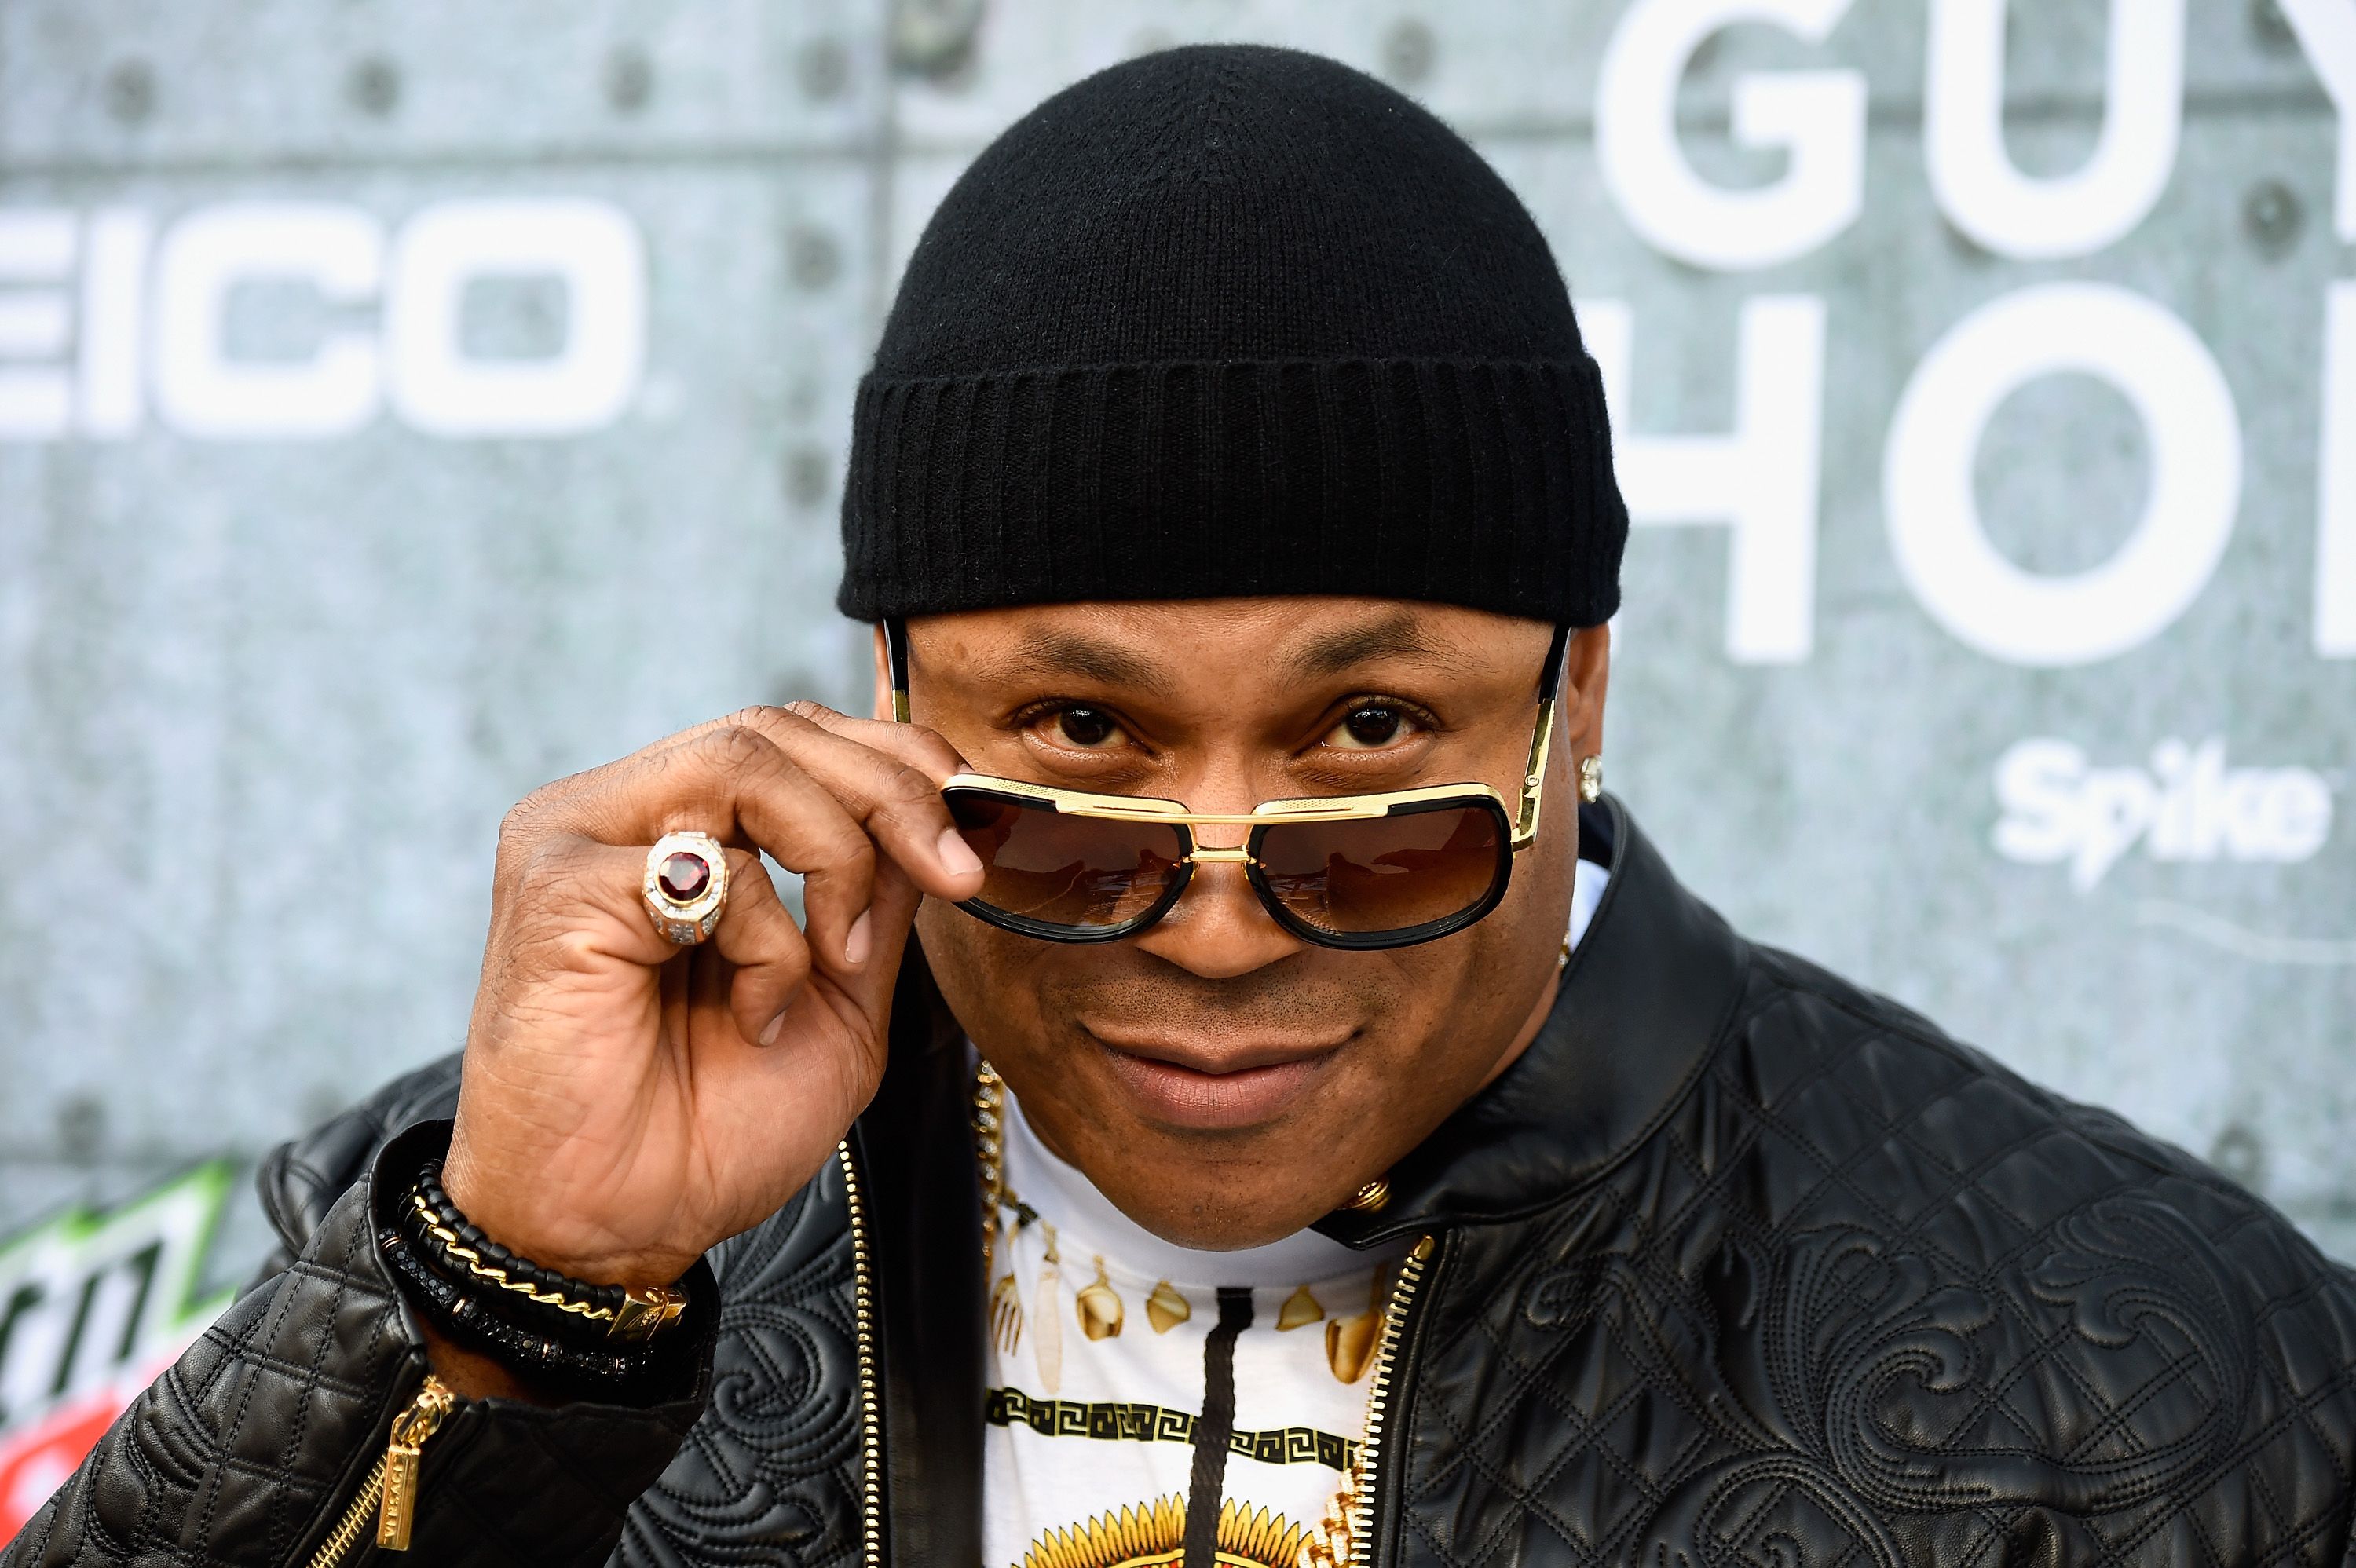 LL Cool J during Spike TV's Guys Choice 2015 at Sony Pictures Studios on June 6, 2015. | Photo: Getty Images